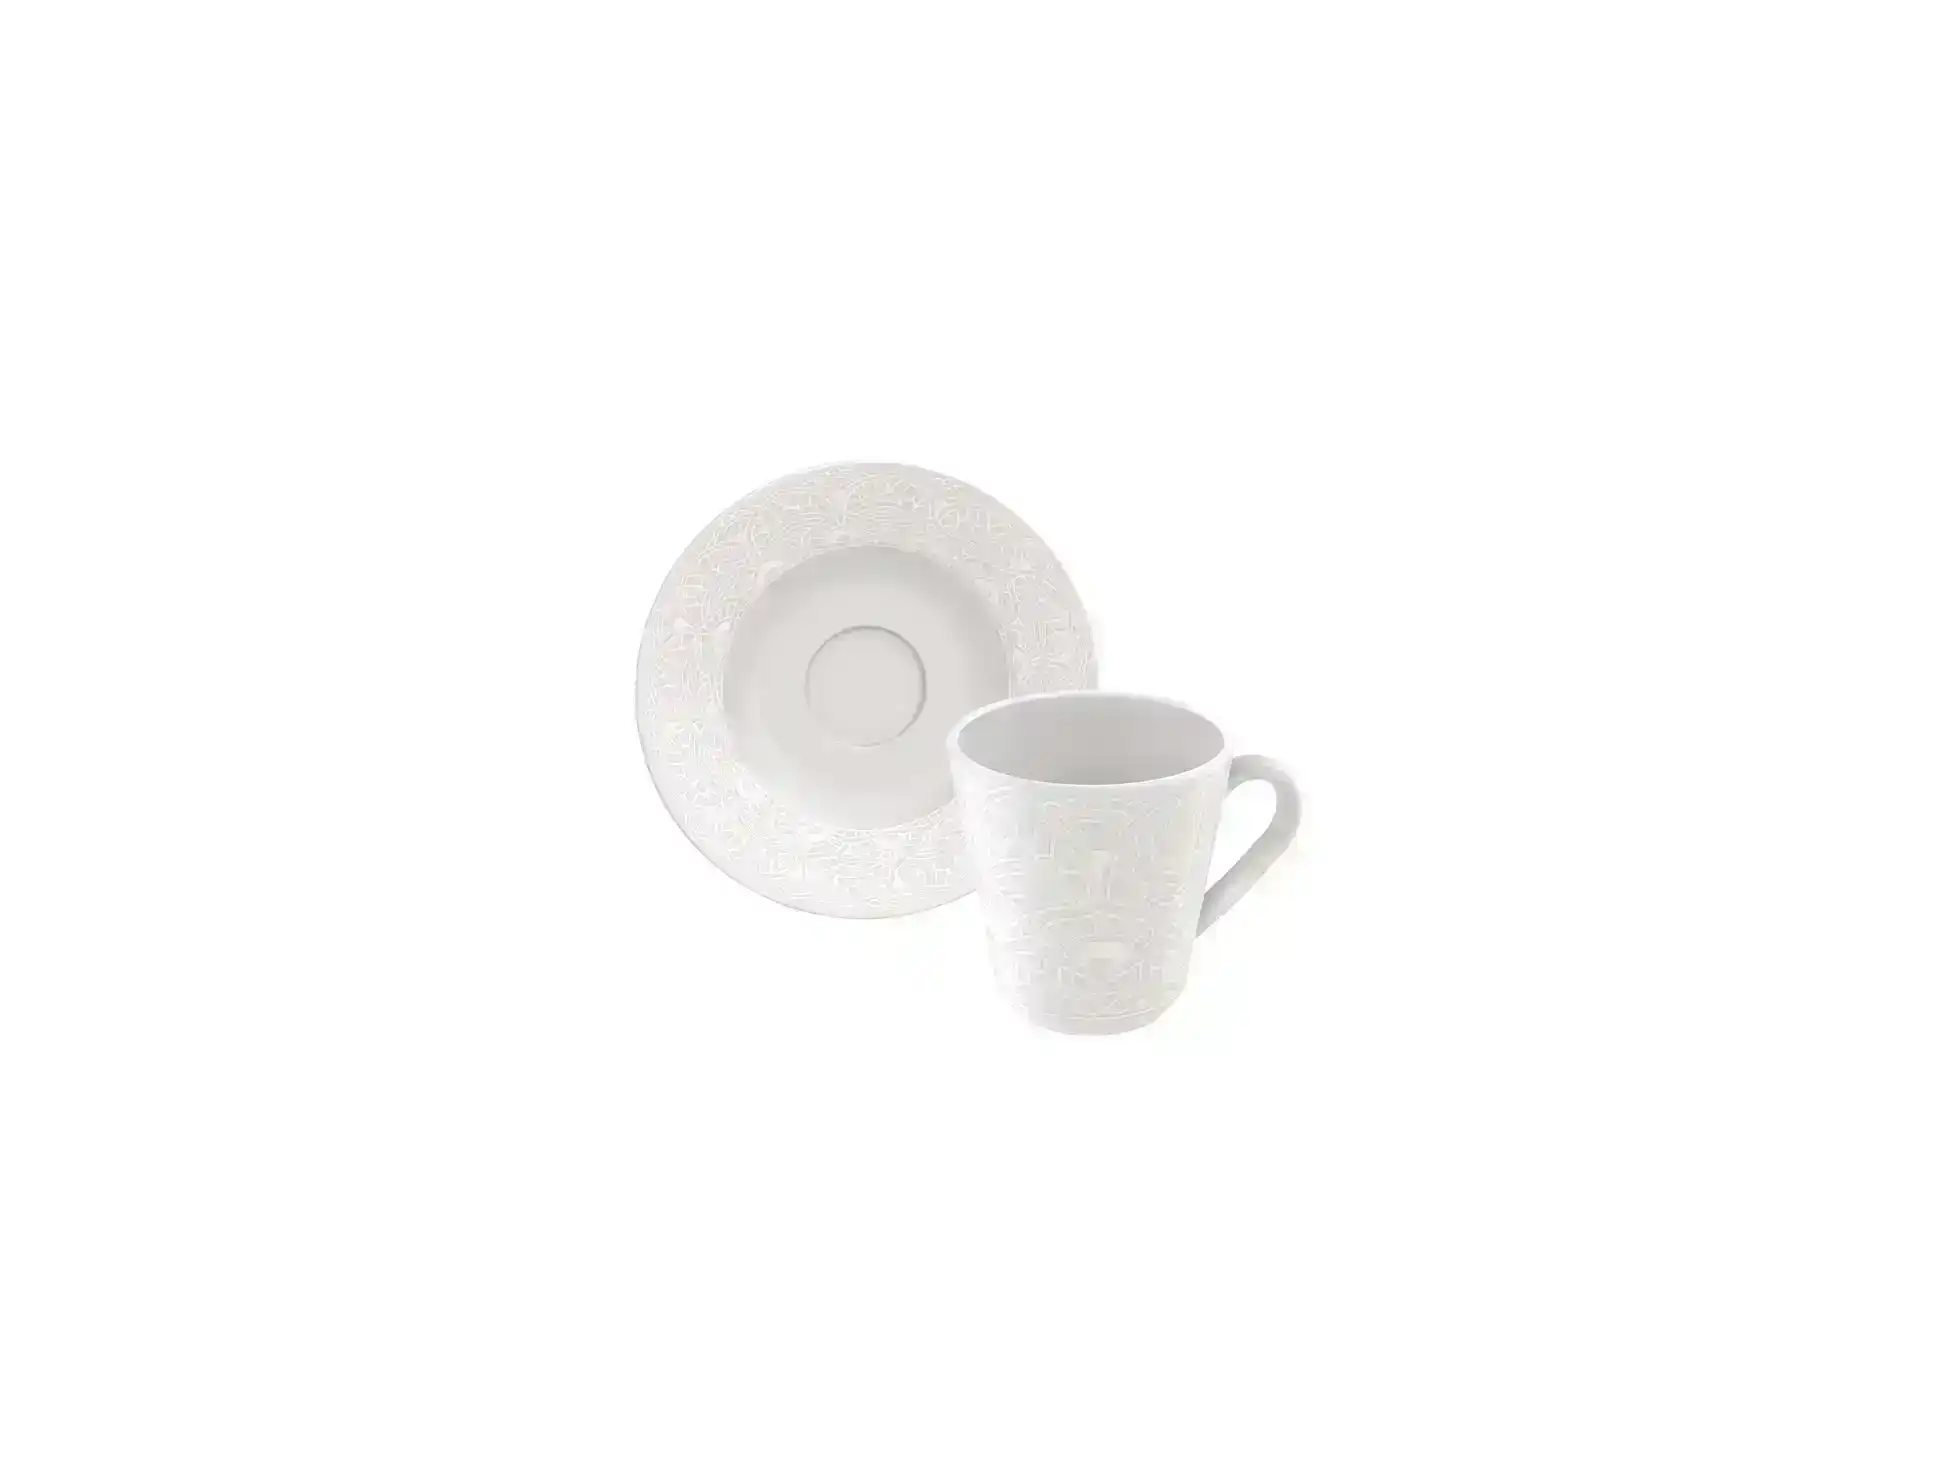 Tramontina Alicia 12-Piece Set of Decorated Porcelain Coffe Cups and Saucers, 70 ml